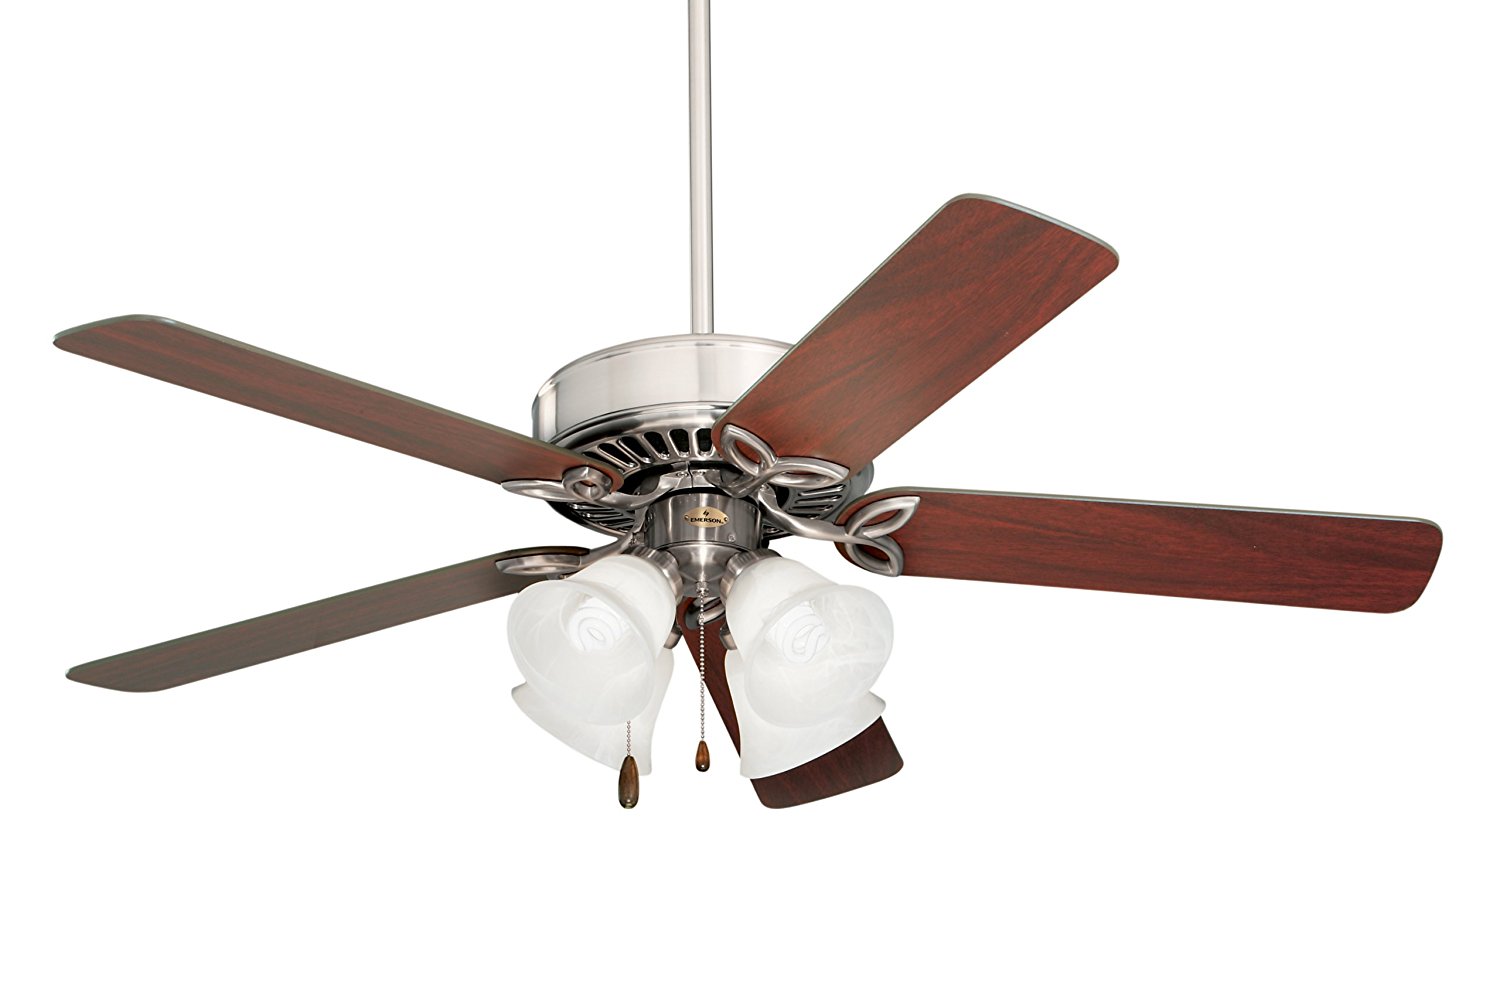 Emerson Ceiling Fans CF711BS Pro Series II Indoor Ceiling Fan With Light, 50-Inch Blades, Brushed Steel Finish